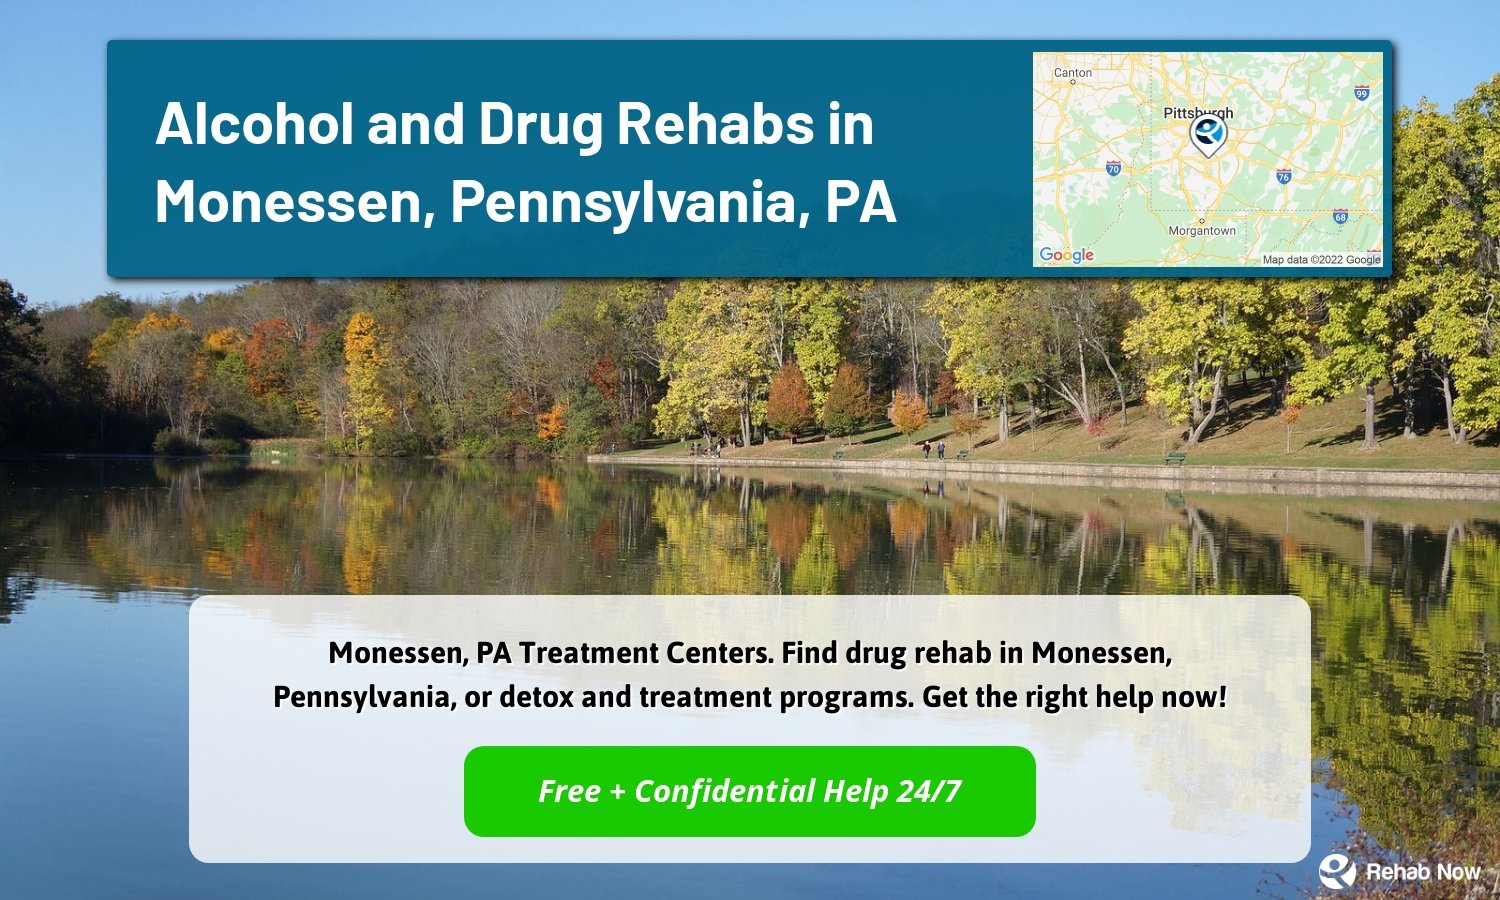 Monessen, PA Treatment Centers. Find drug rehab in Monessen, Pennsylvania, or detox and treatment programs. Get the right help now!